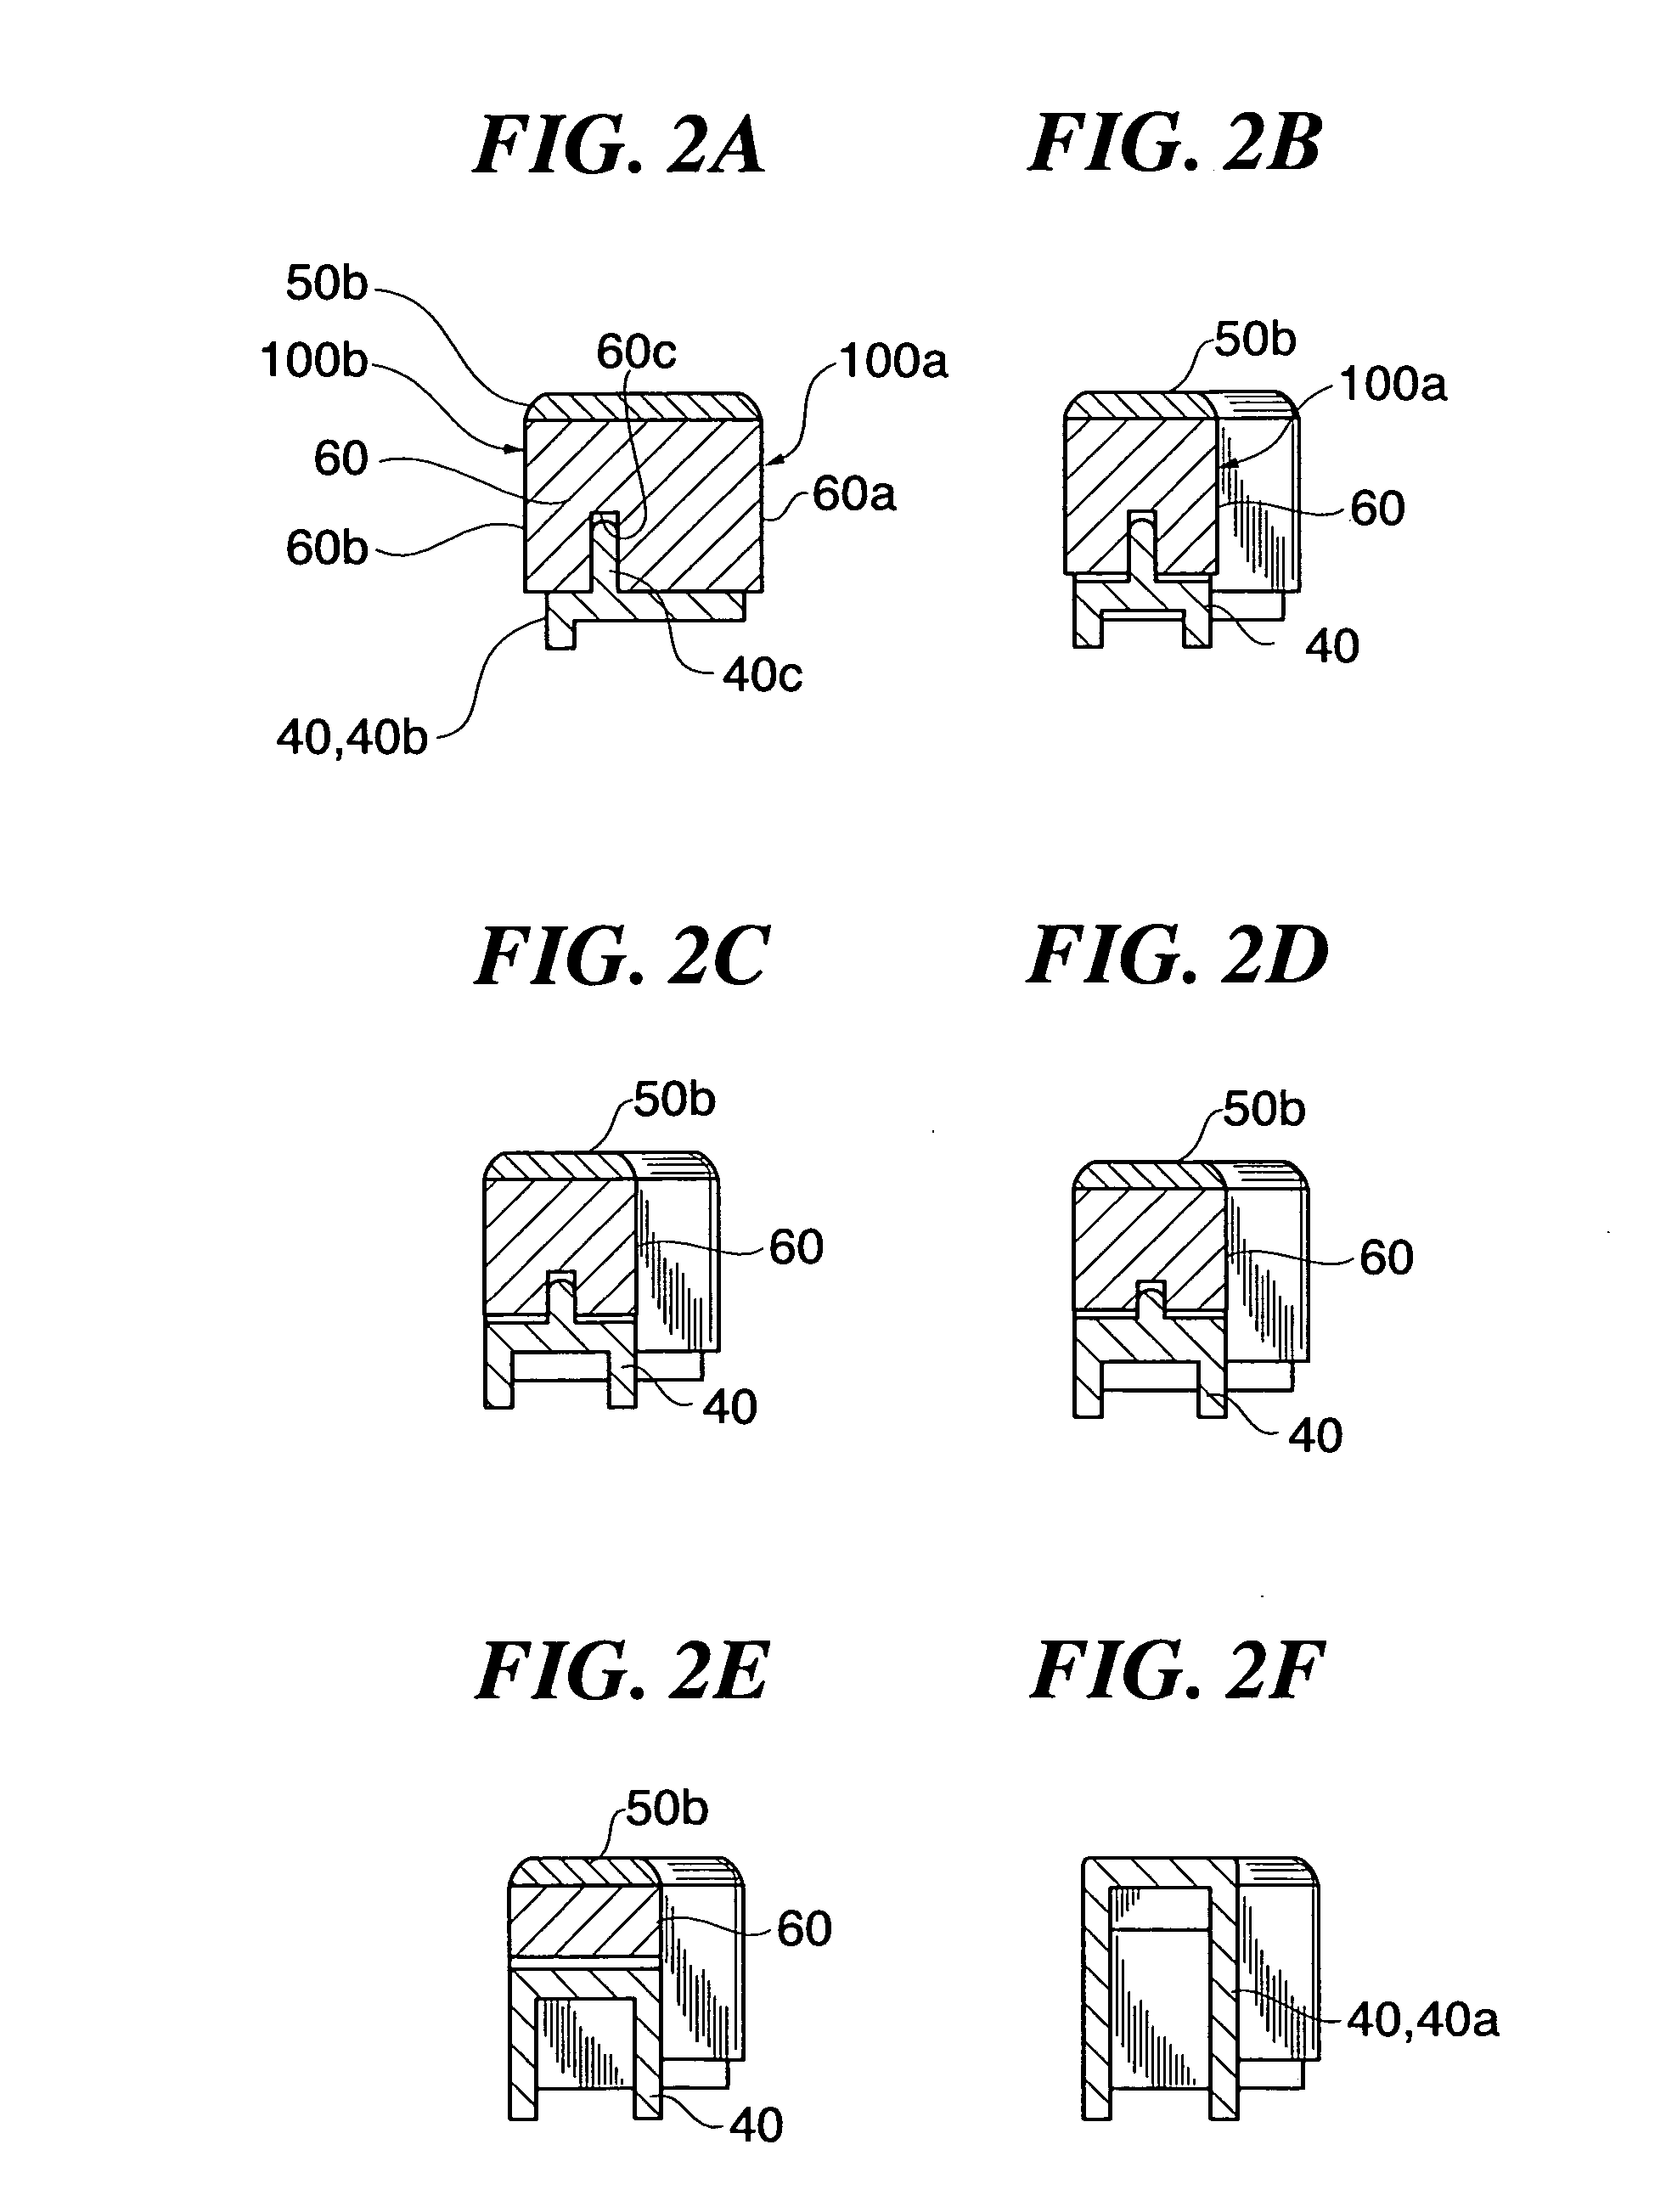 Key structure and keyboard apparatus